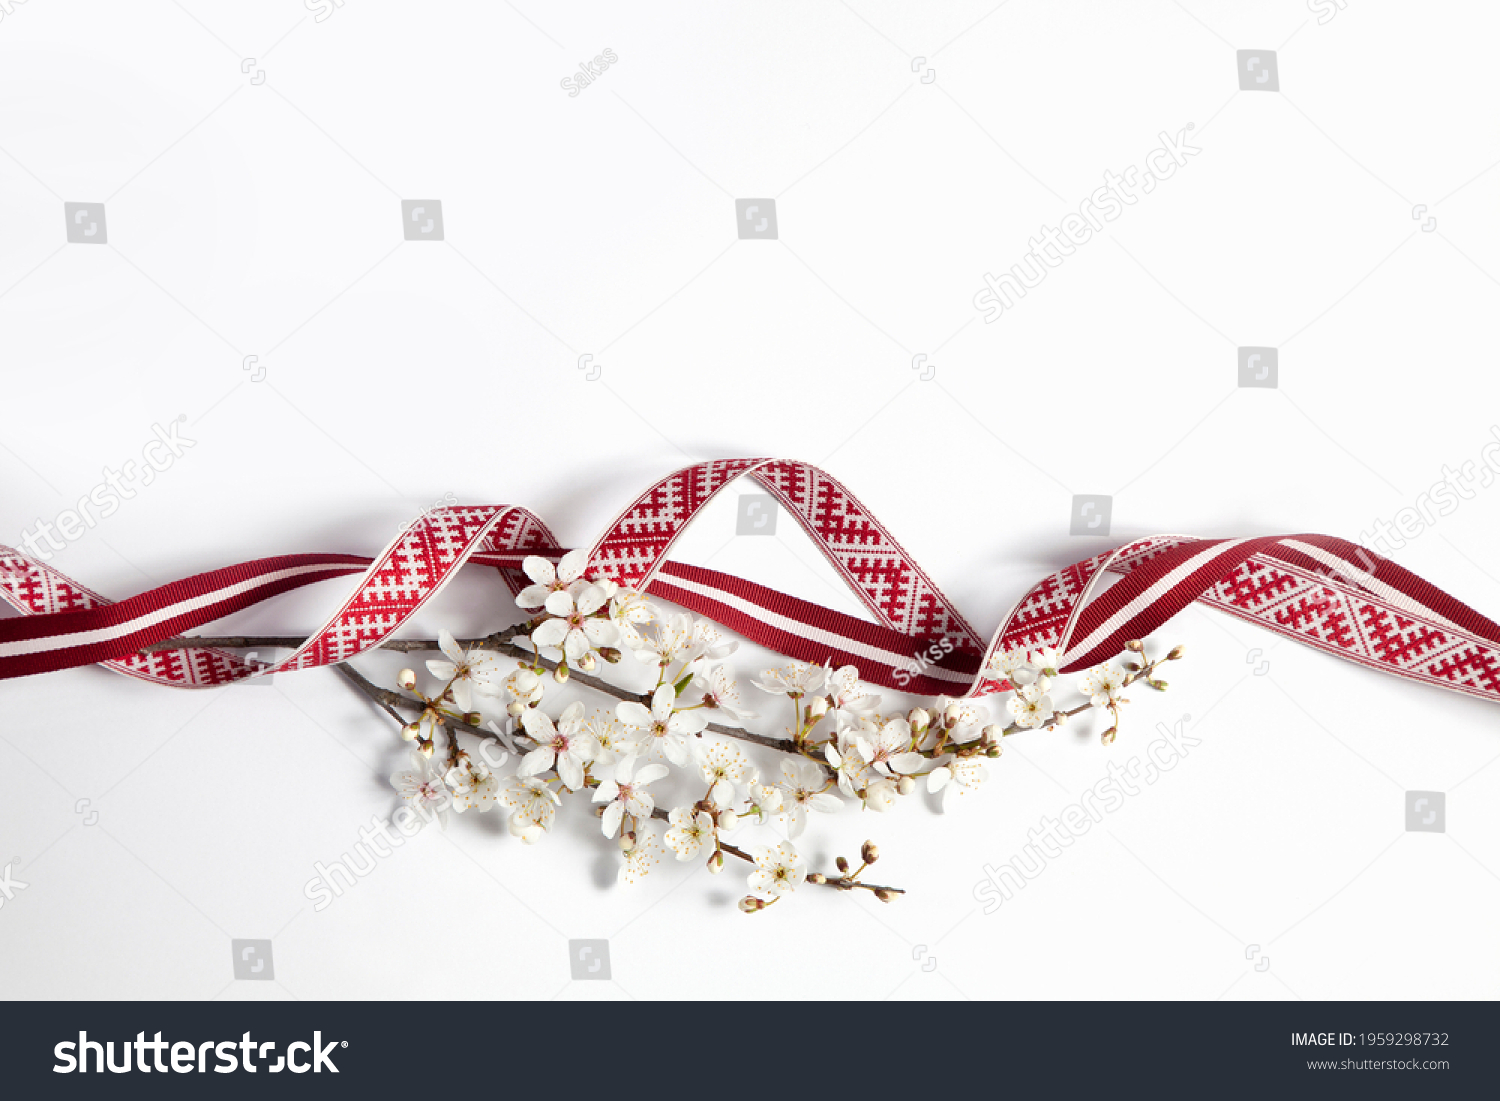 Latvian national celebration decoration with a flourishing branch made of Latvian flag ribbon and Lielvarde belt ribbon for independence day of Latvia #1959298732